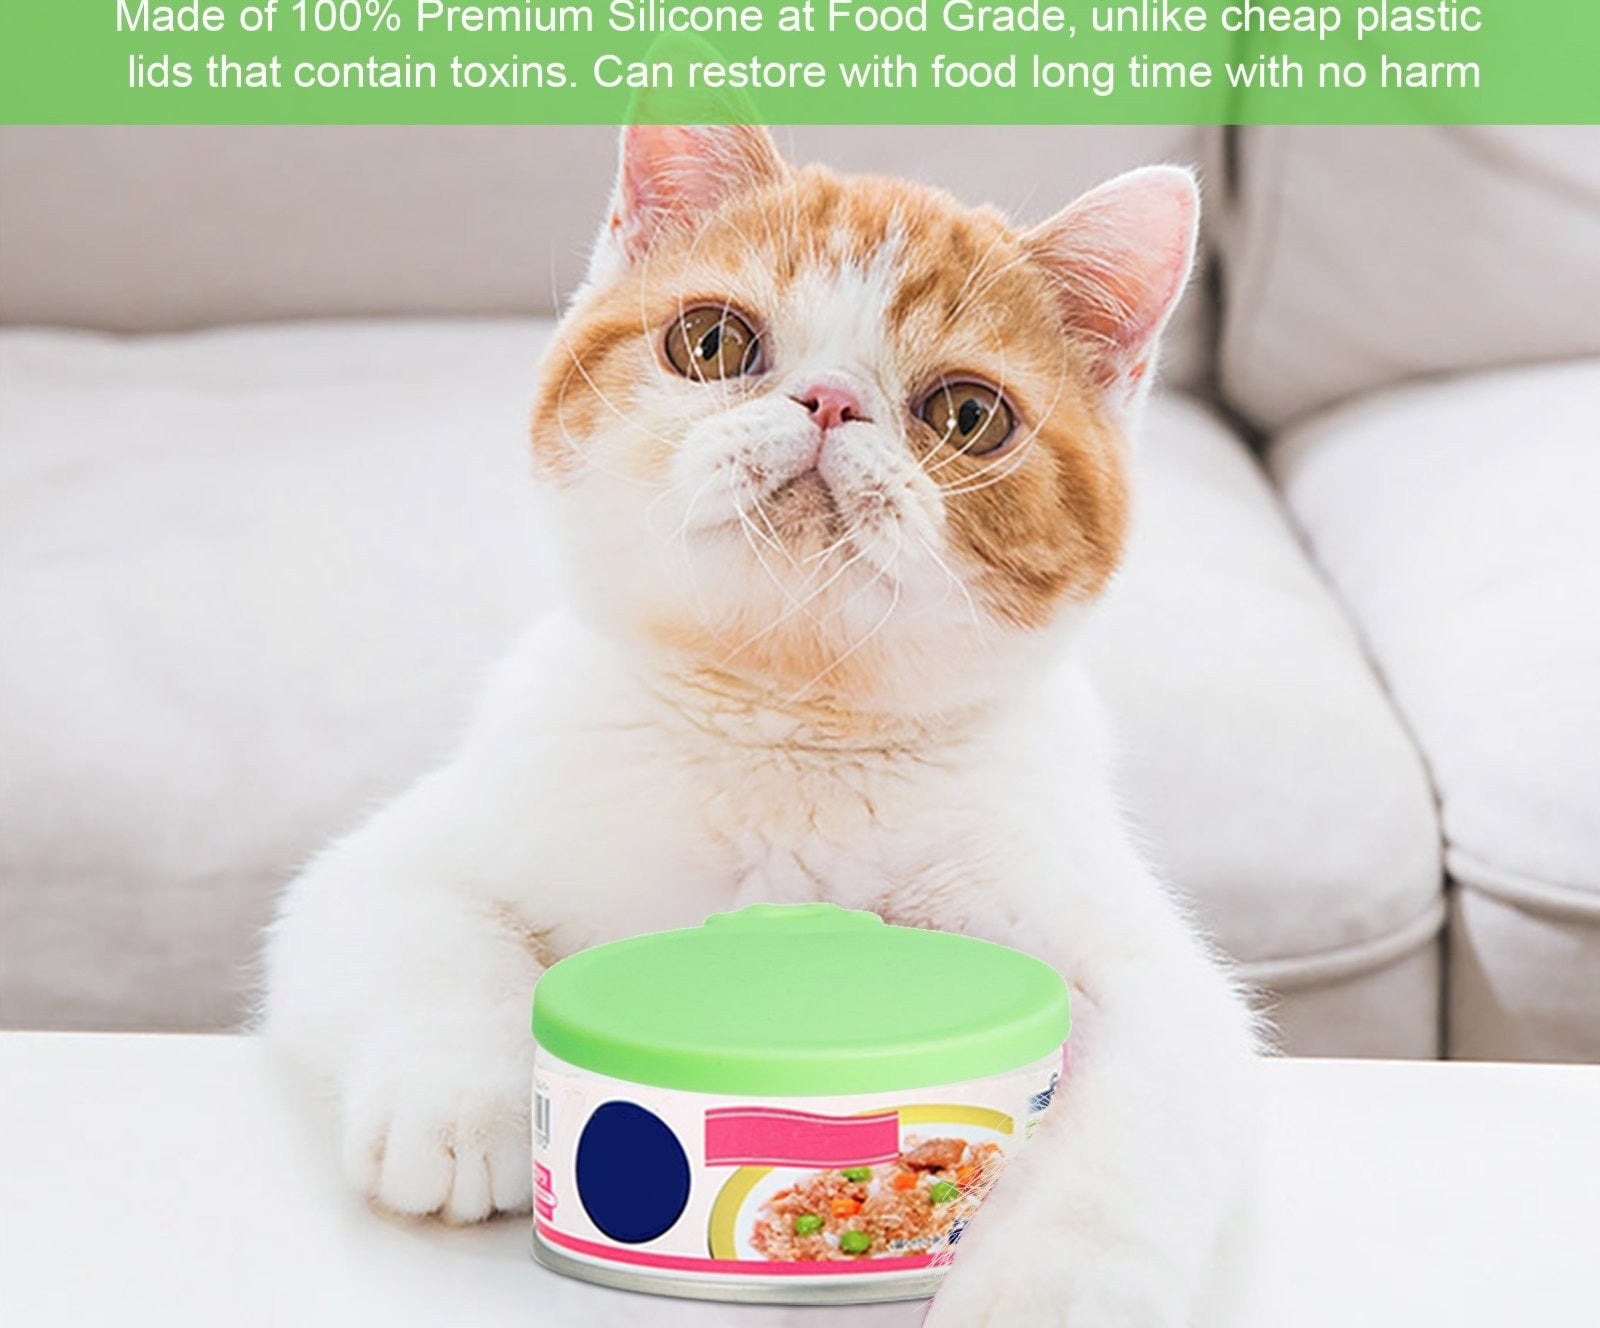 A cat with canned food